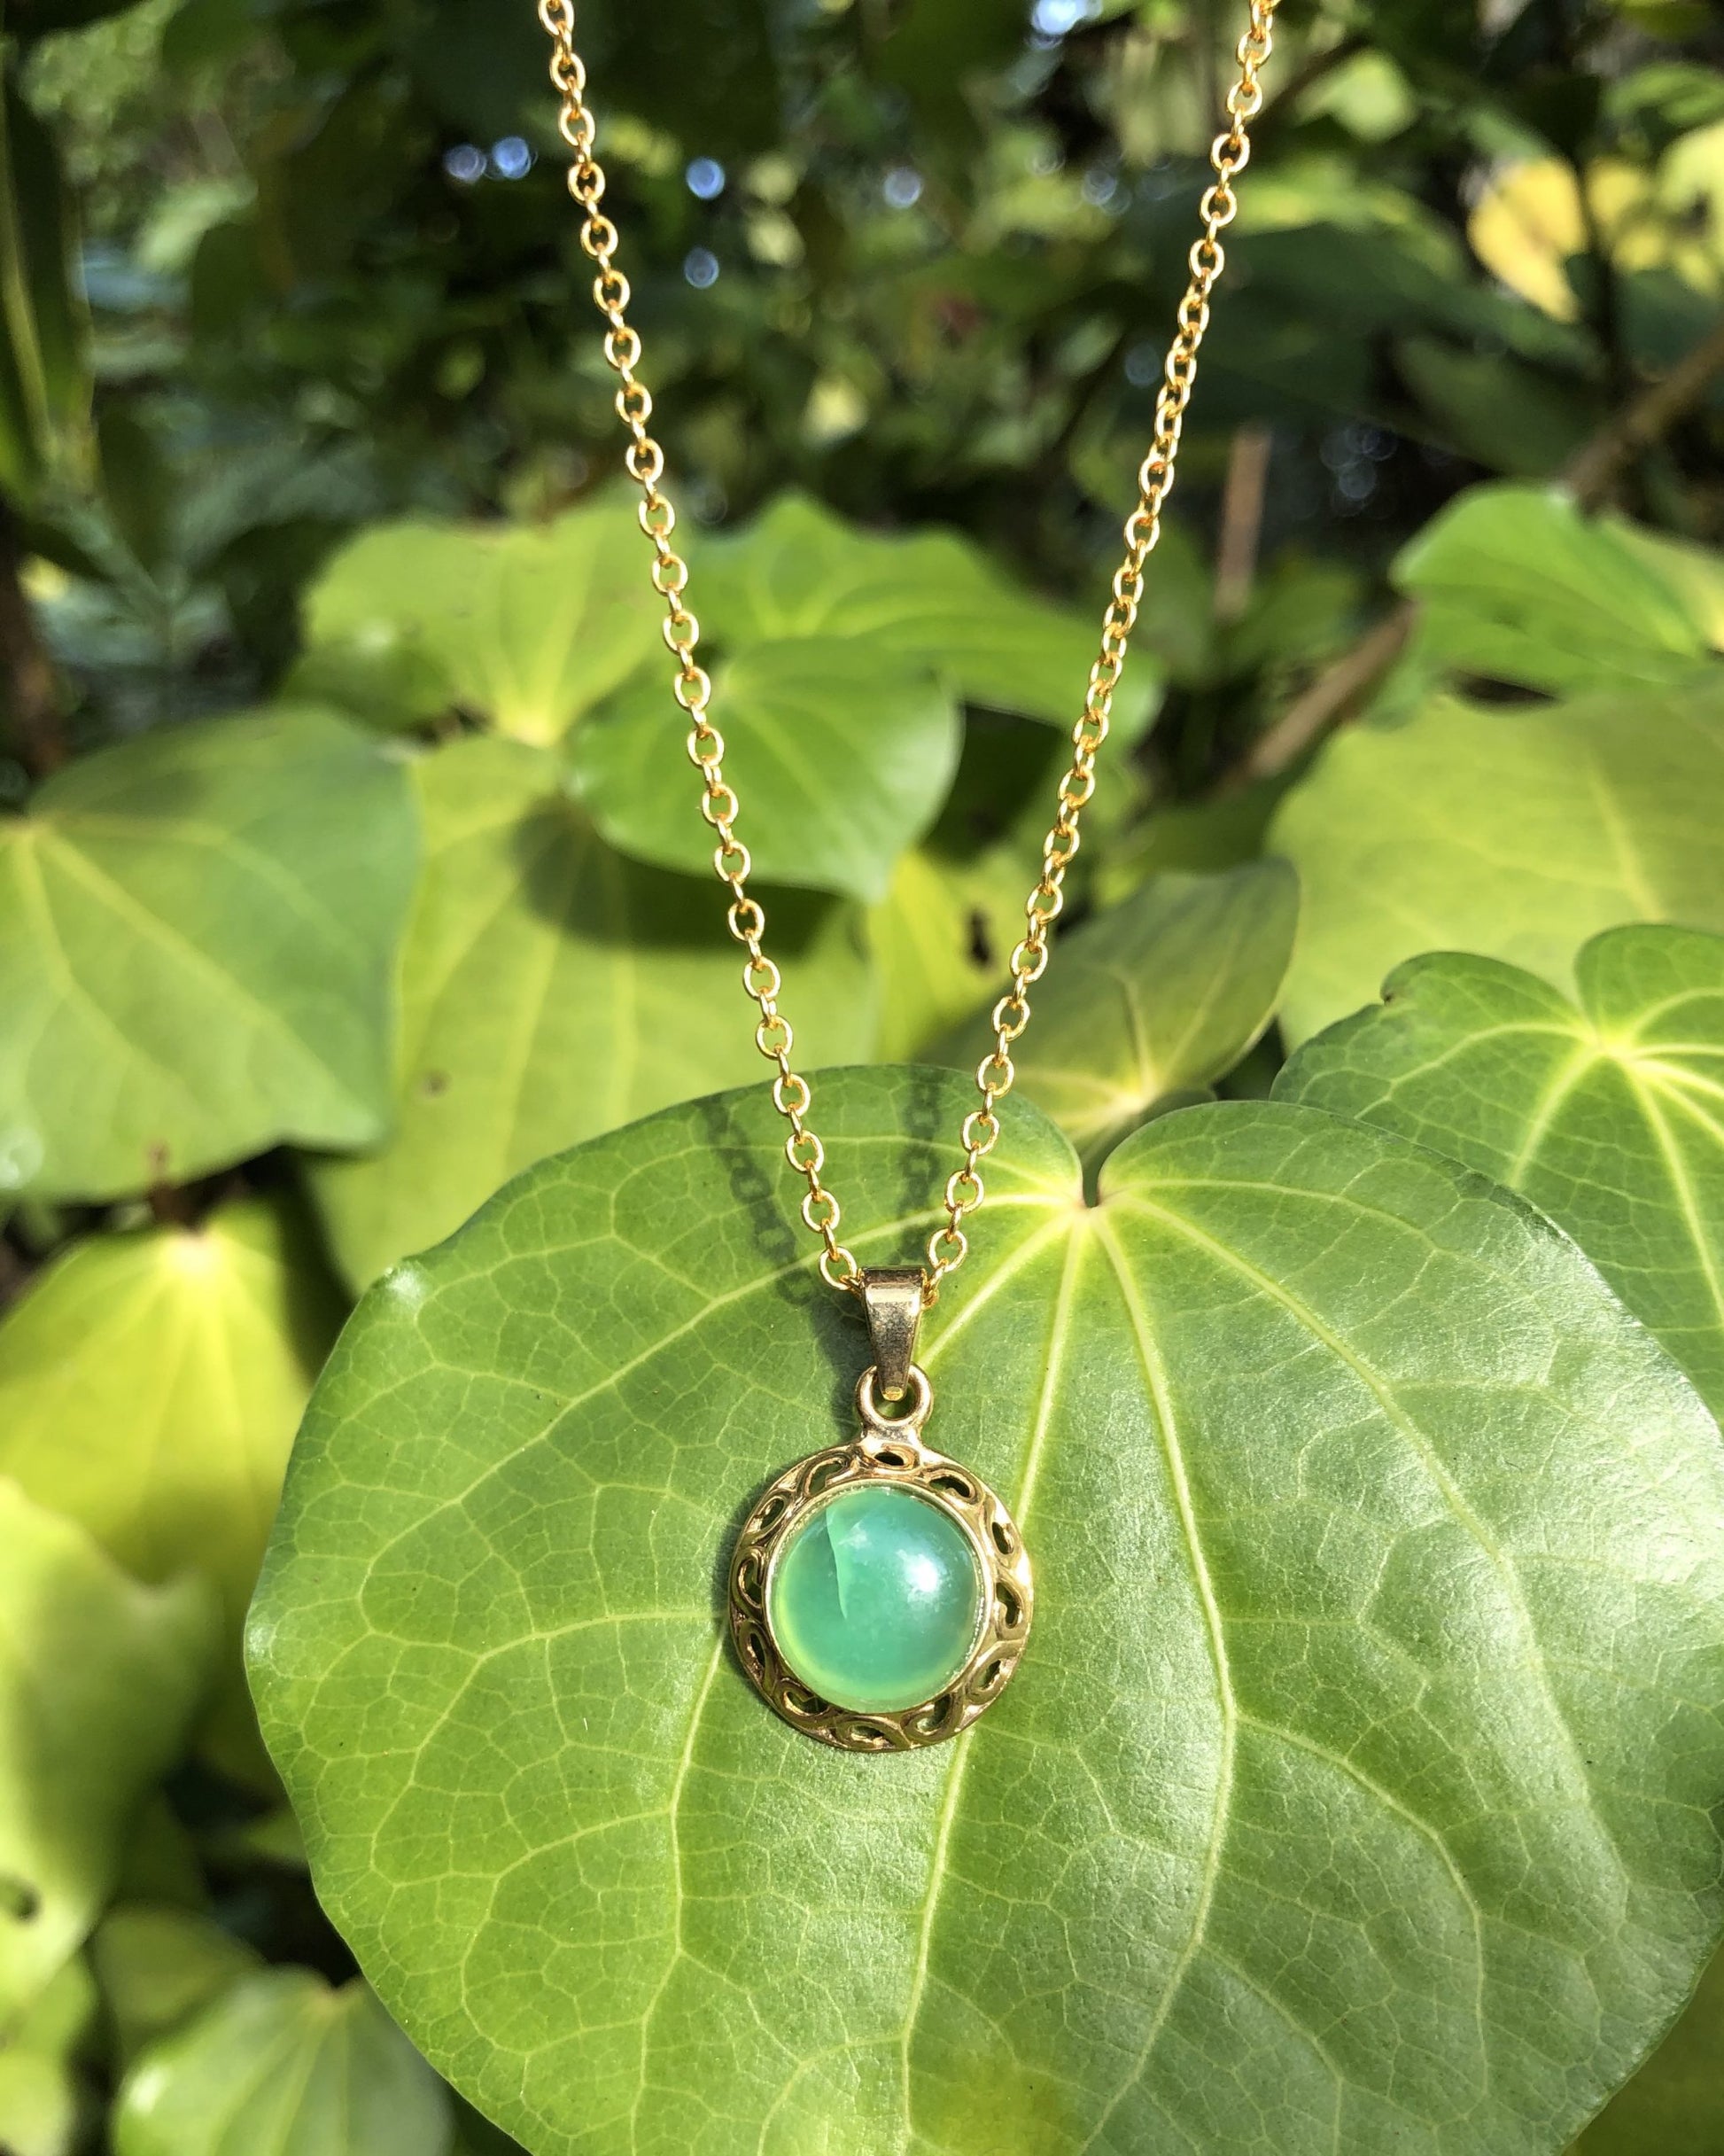 Necklace of brilliant green Australian Chrysoprase, hand polished to a 10mm round cabochon and set in a gold plated setting with 19 inch chain.